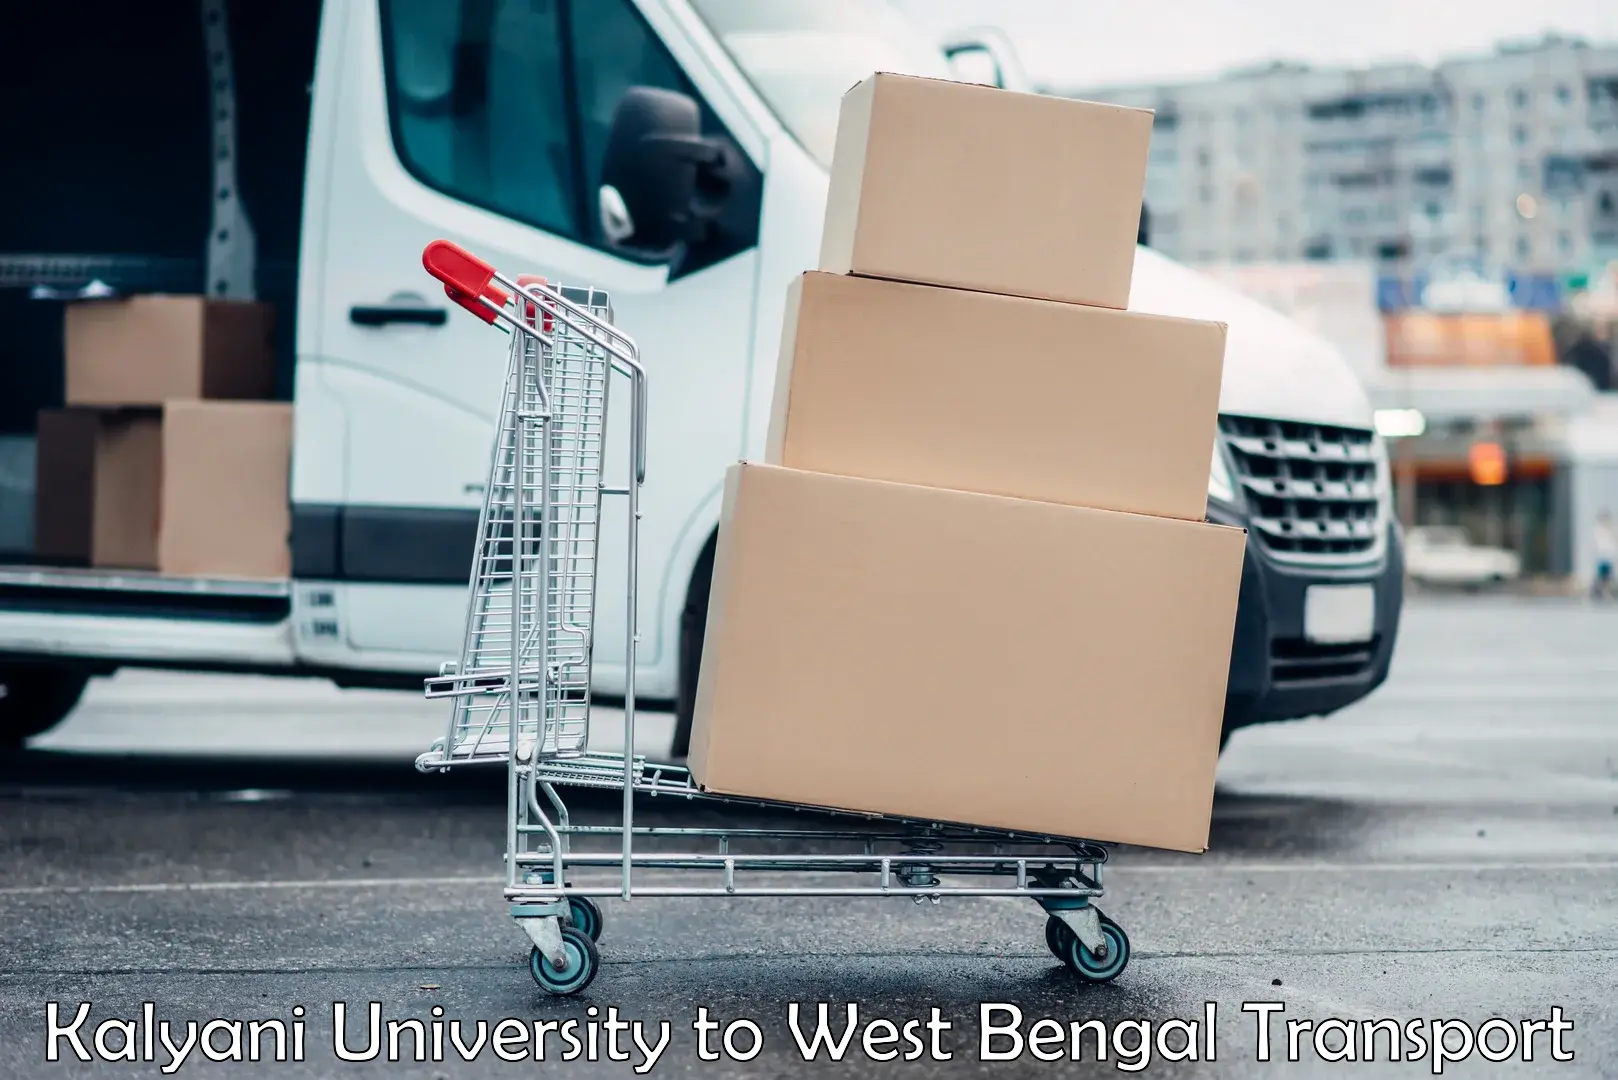 Air freight transport services in Kalyani University to Mohammad Bazar